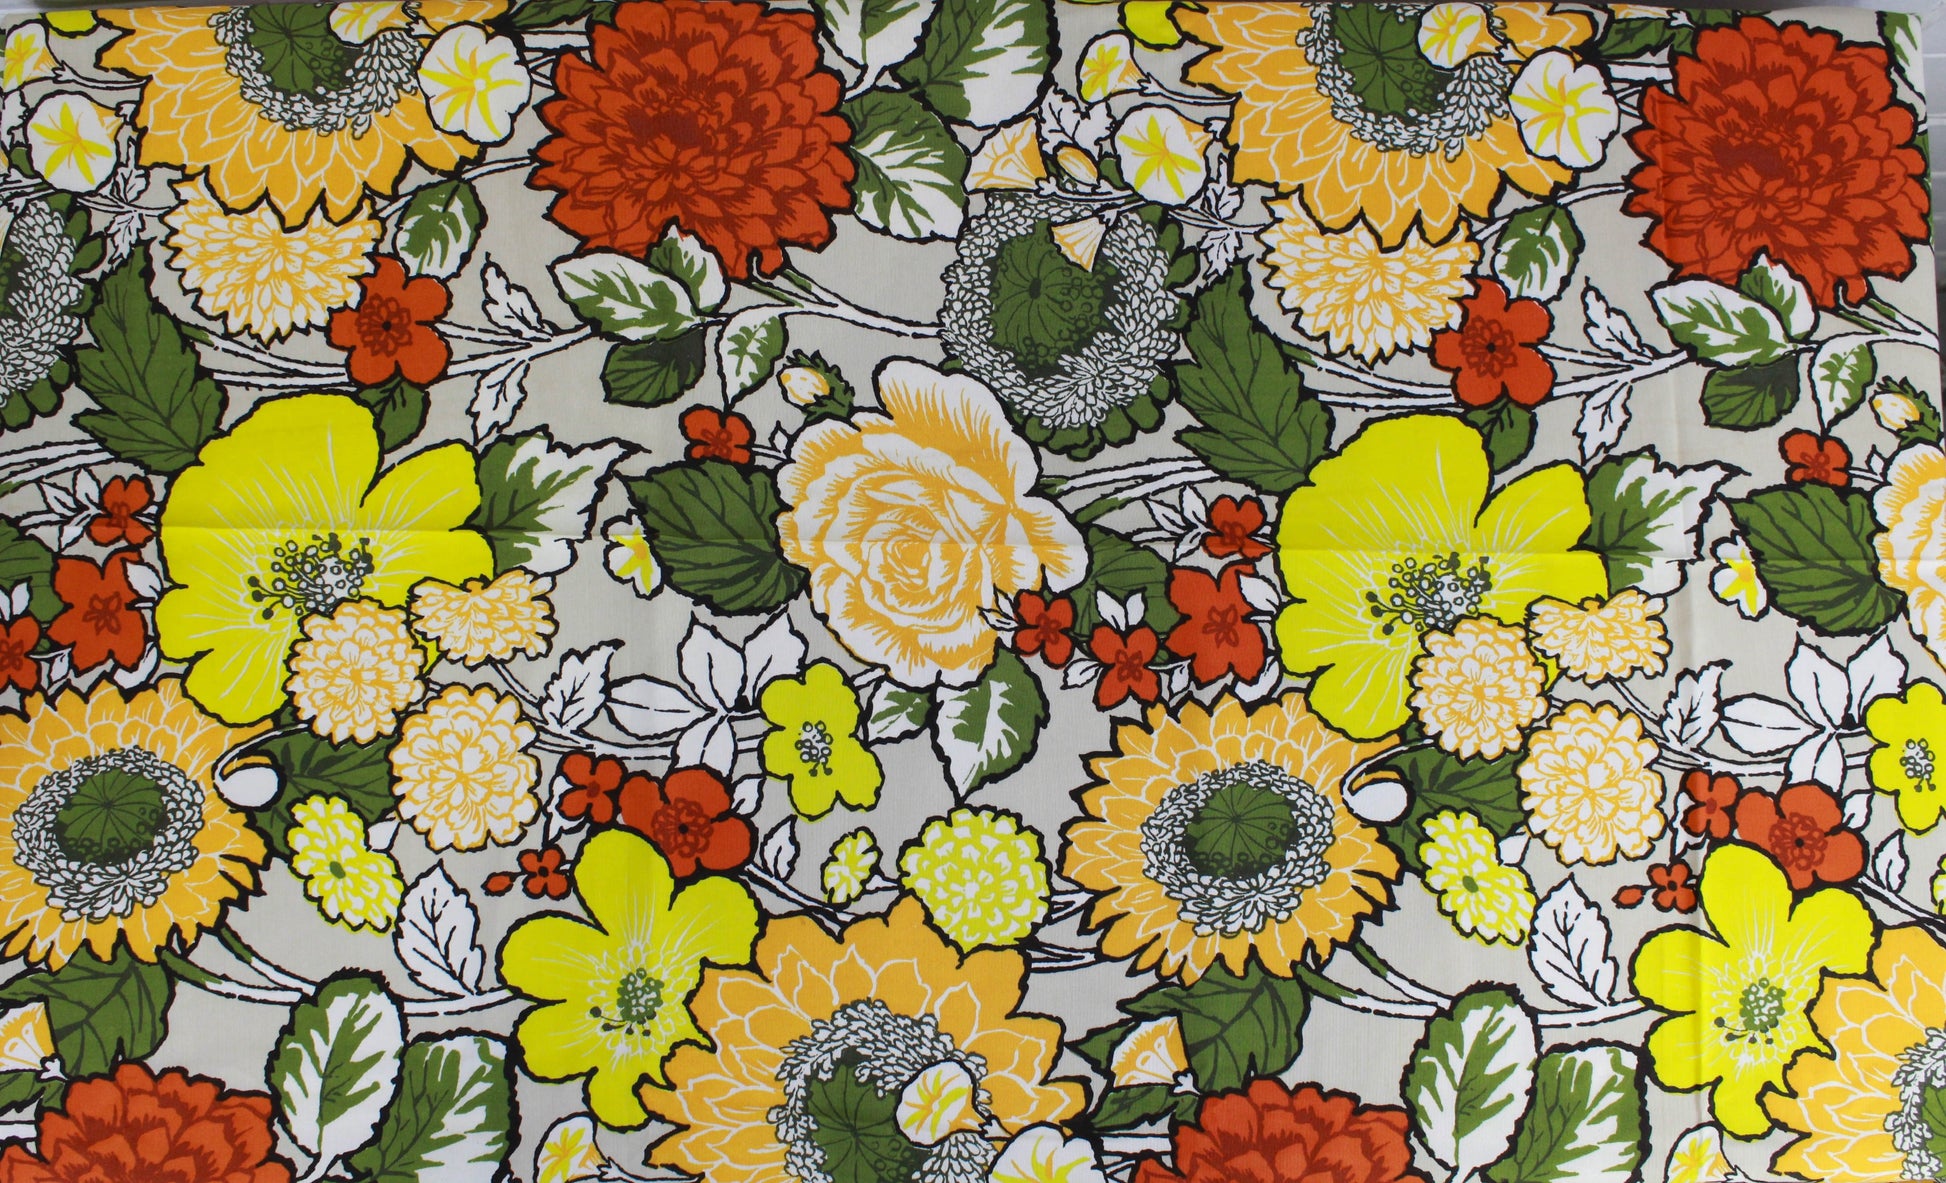 Cotton Fabric, Yellow Floral Fabric, Flower Print, 100% Cotton